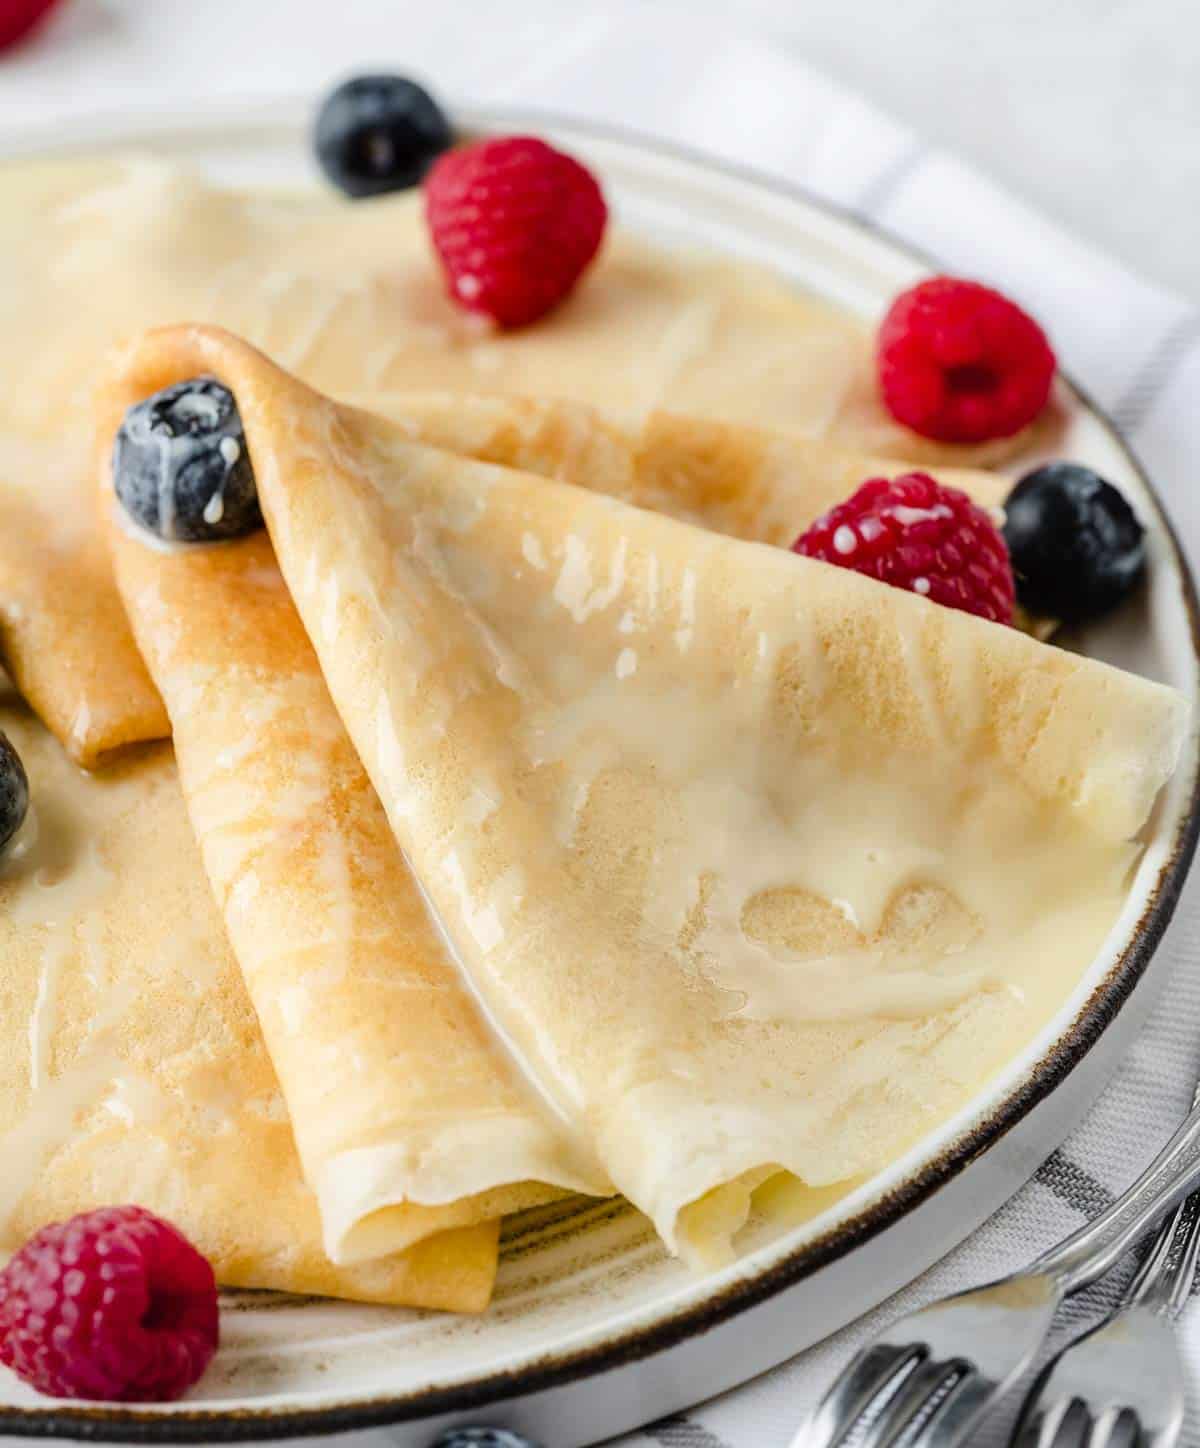 Close-up view of crepes drizzled with condensed milk with blueberries and raspberries.